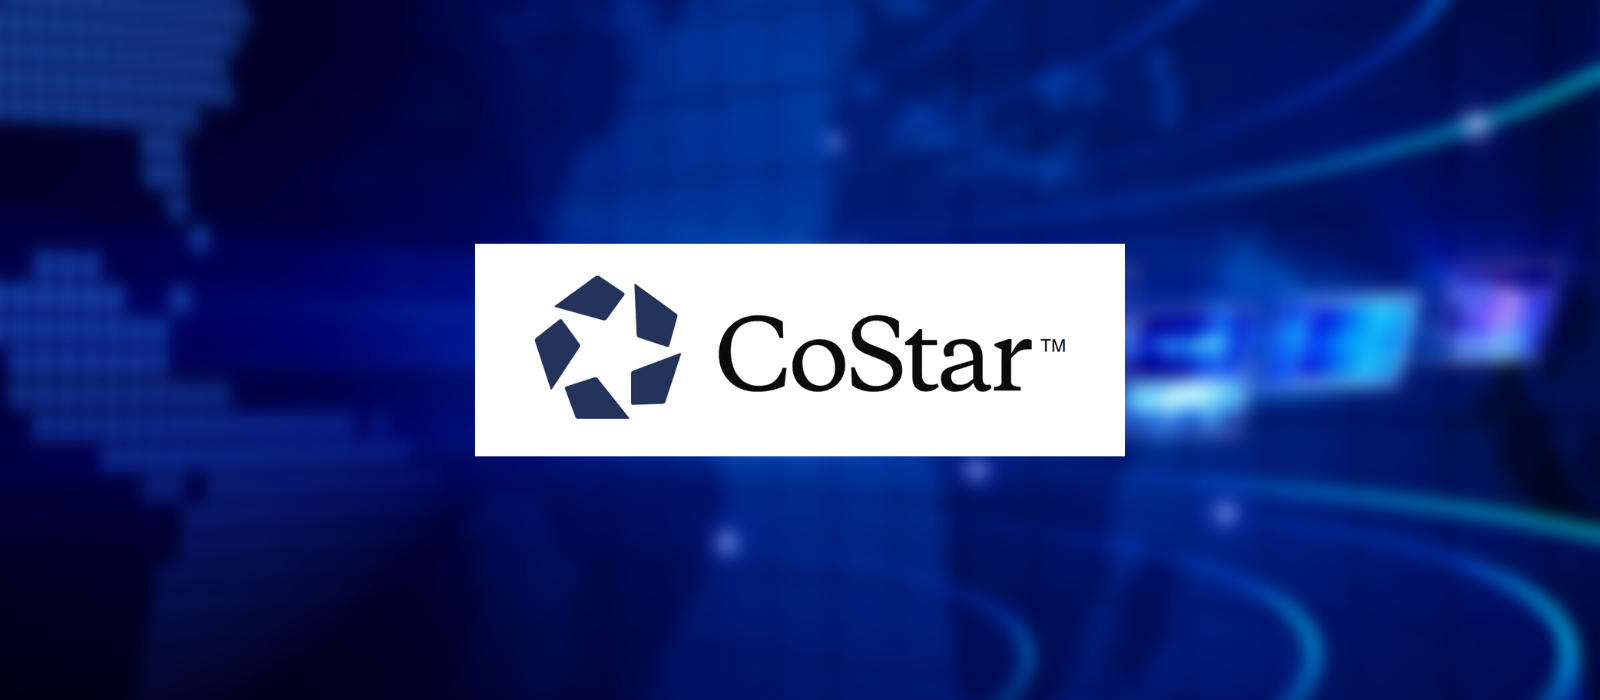 CoStar.com – Pharmaceutical Plants in St. Louis